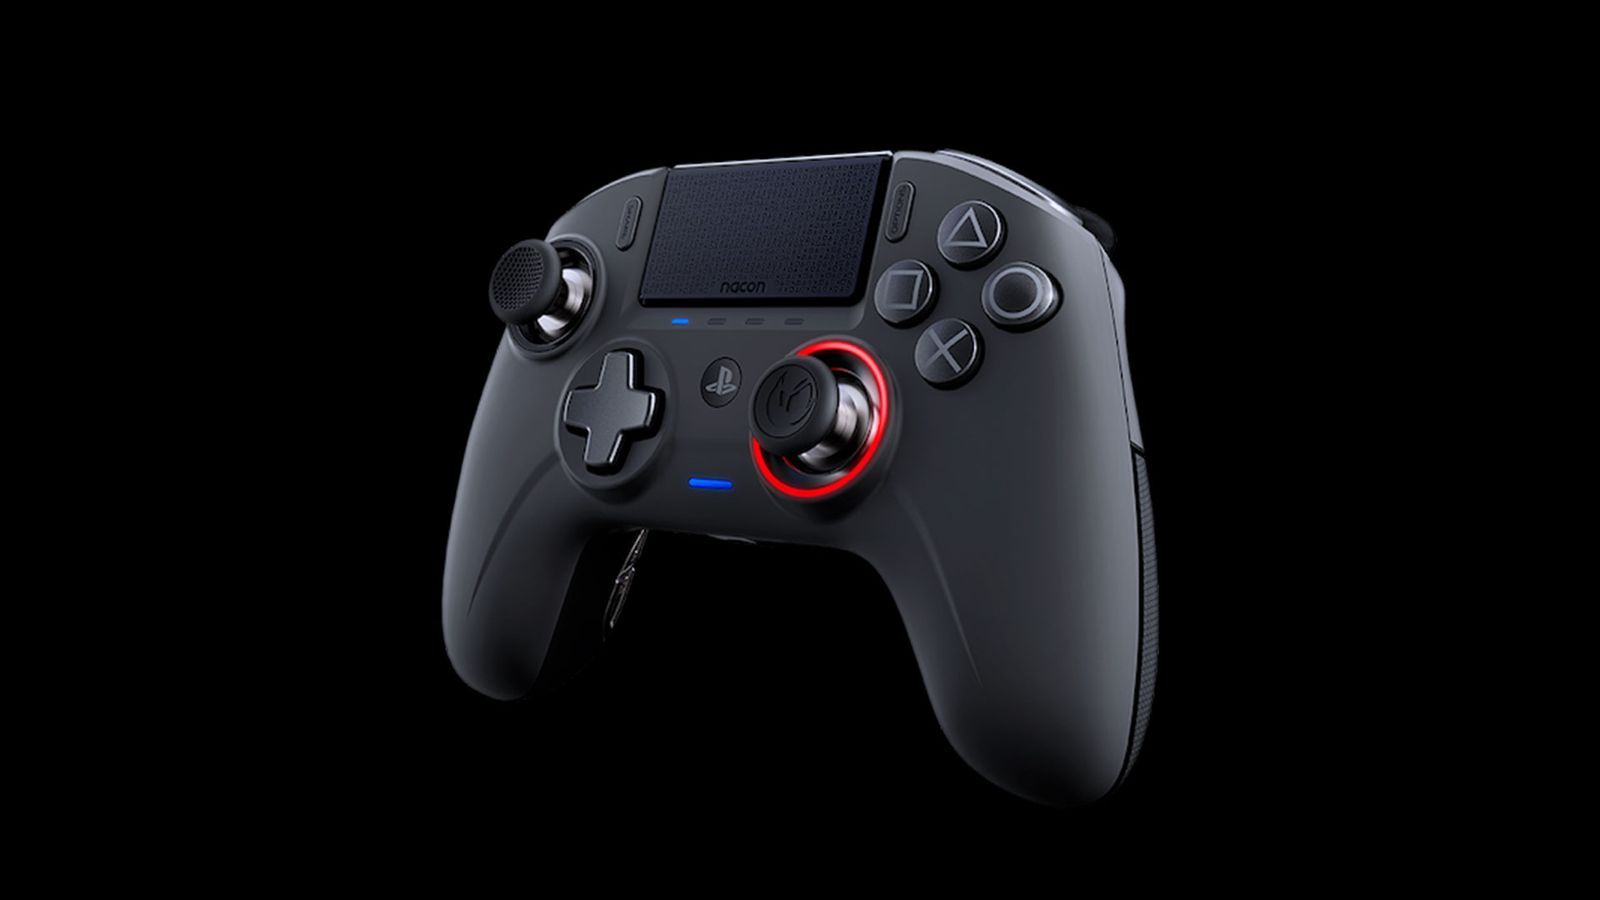 Nacon Revolution Unlimited Pro product image of a black controller with a red light around the right thumbstick.